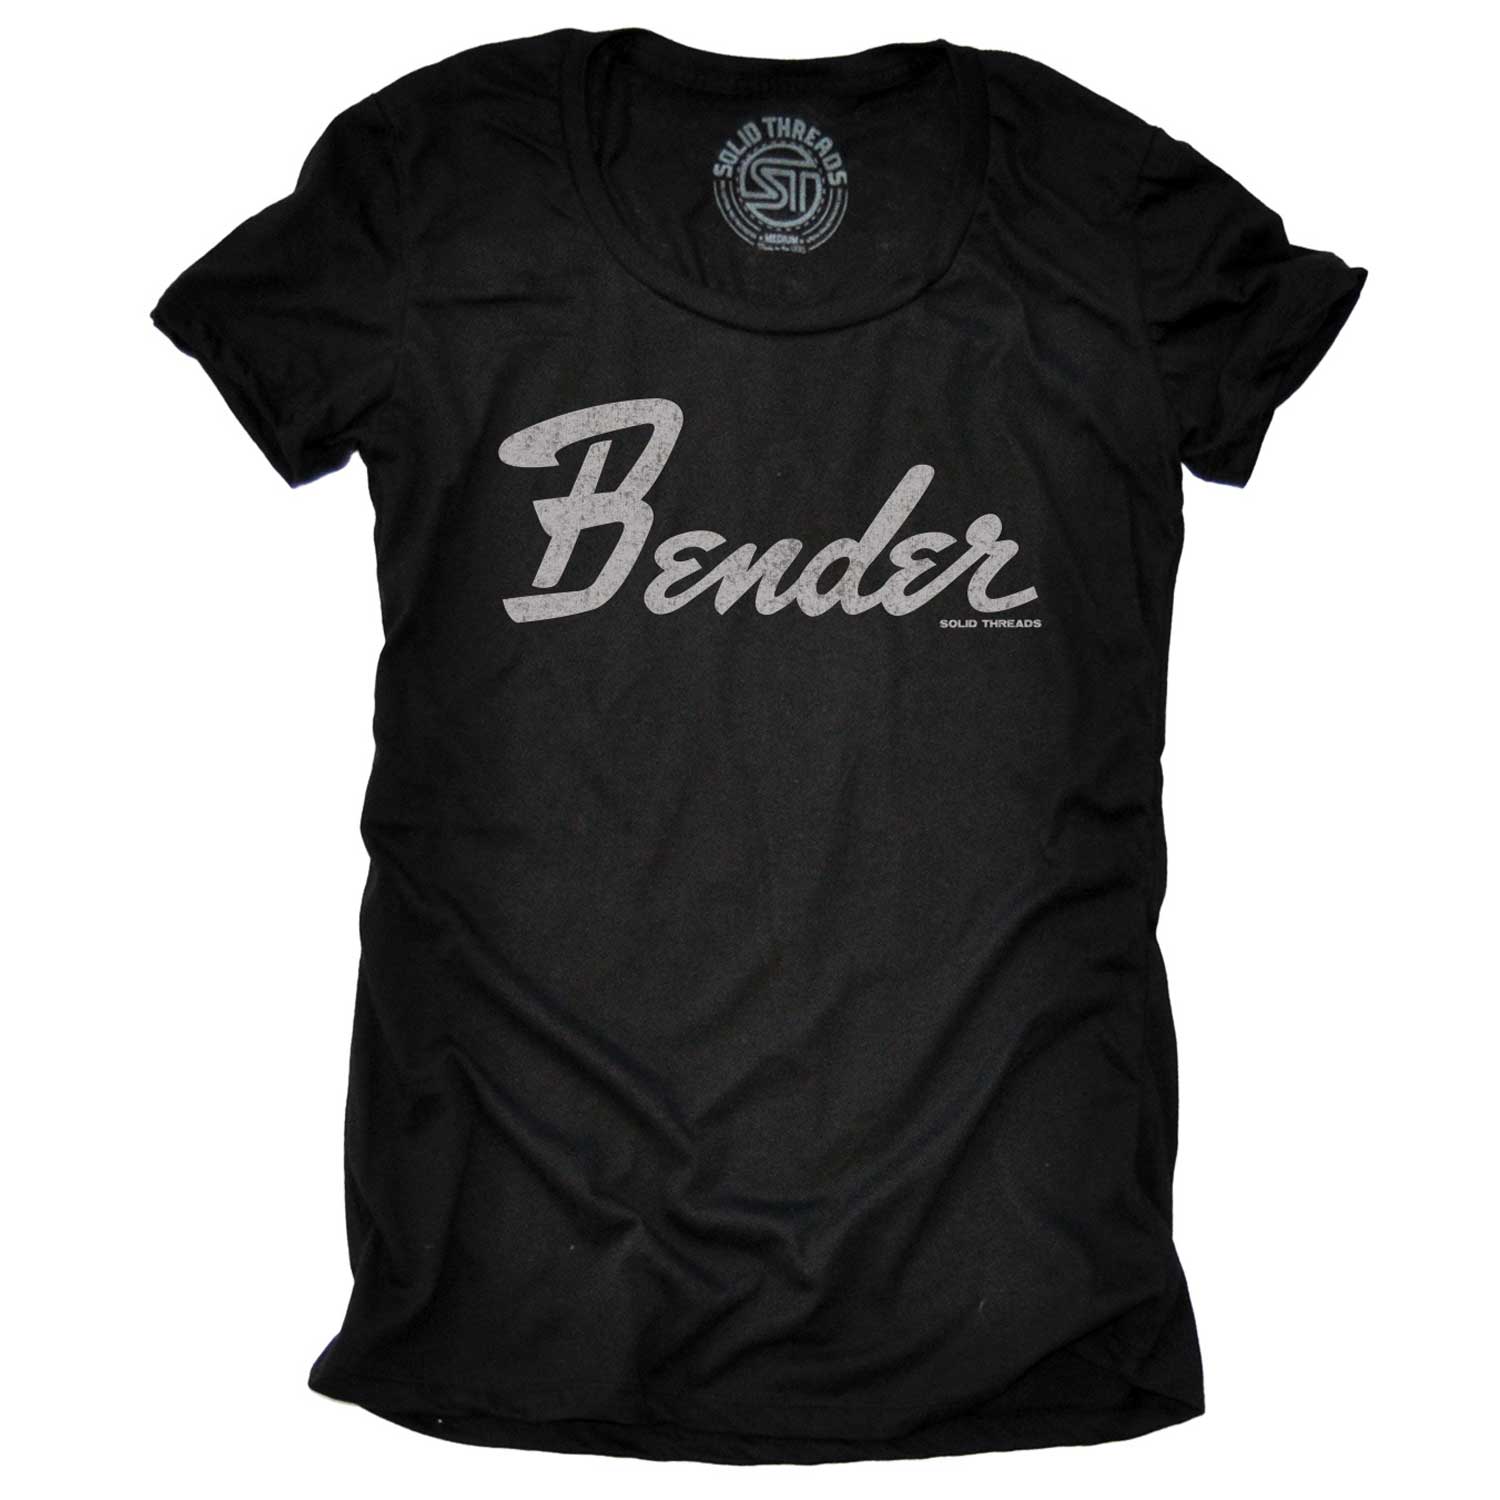 Women's Bender Vintage Partying Graphic T-Shirt | Funny Music Festival Tee | Solid Threads